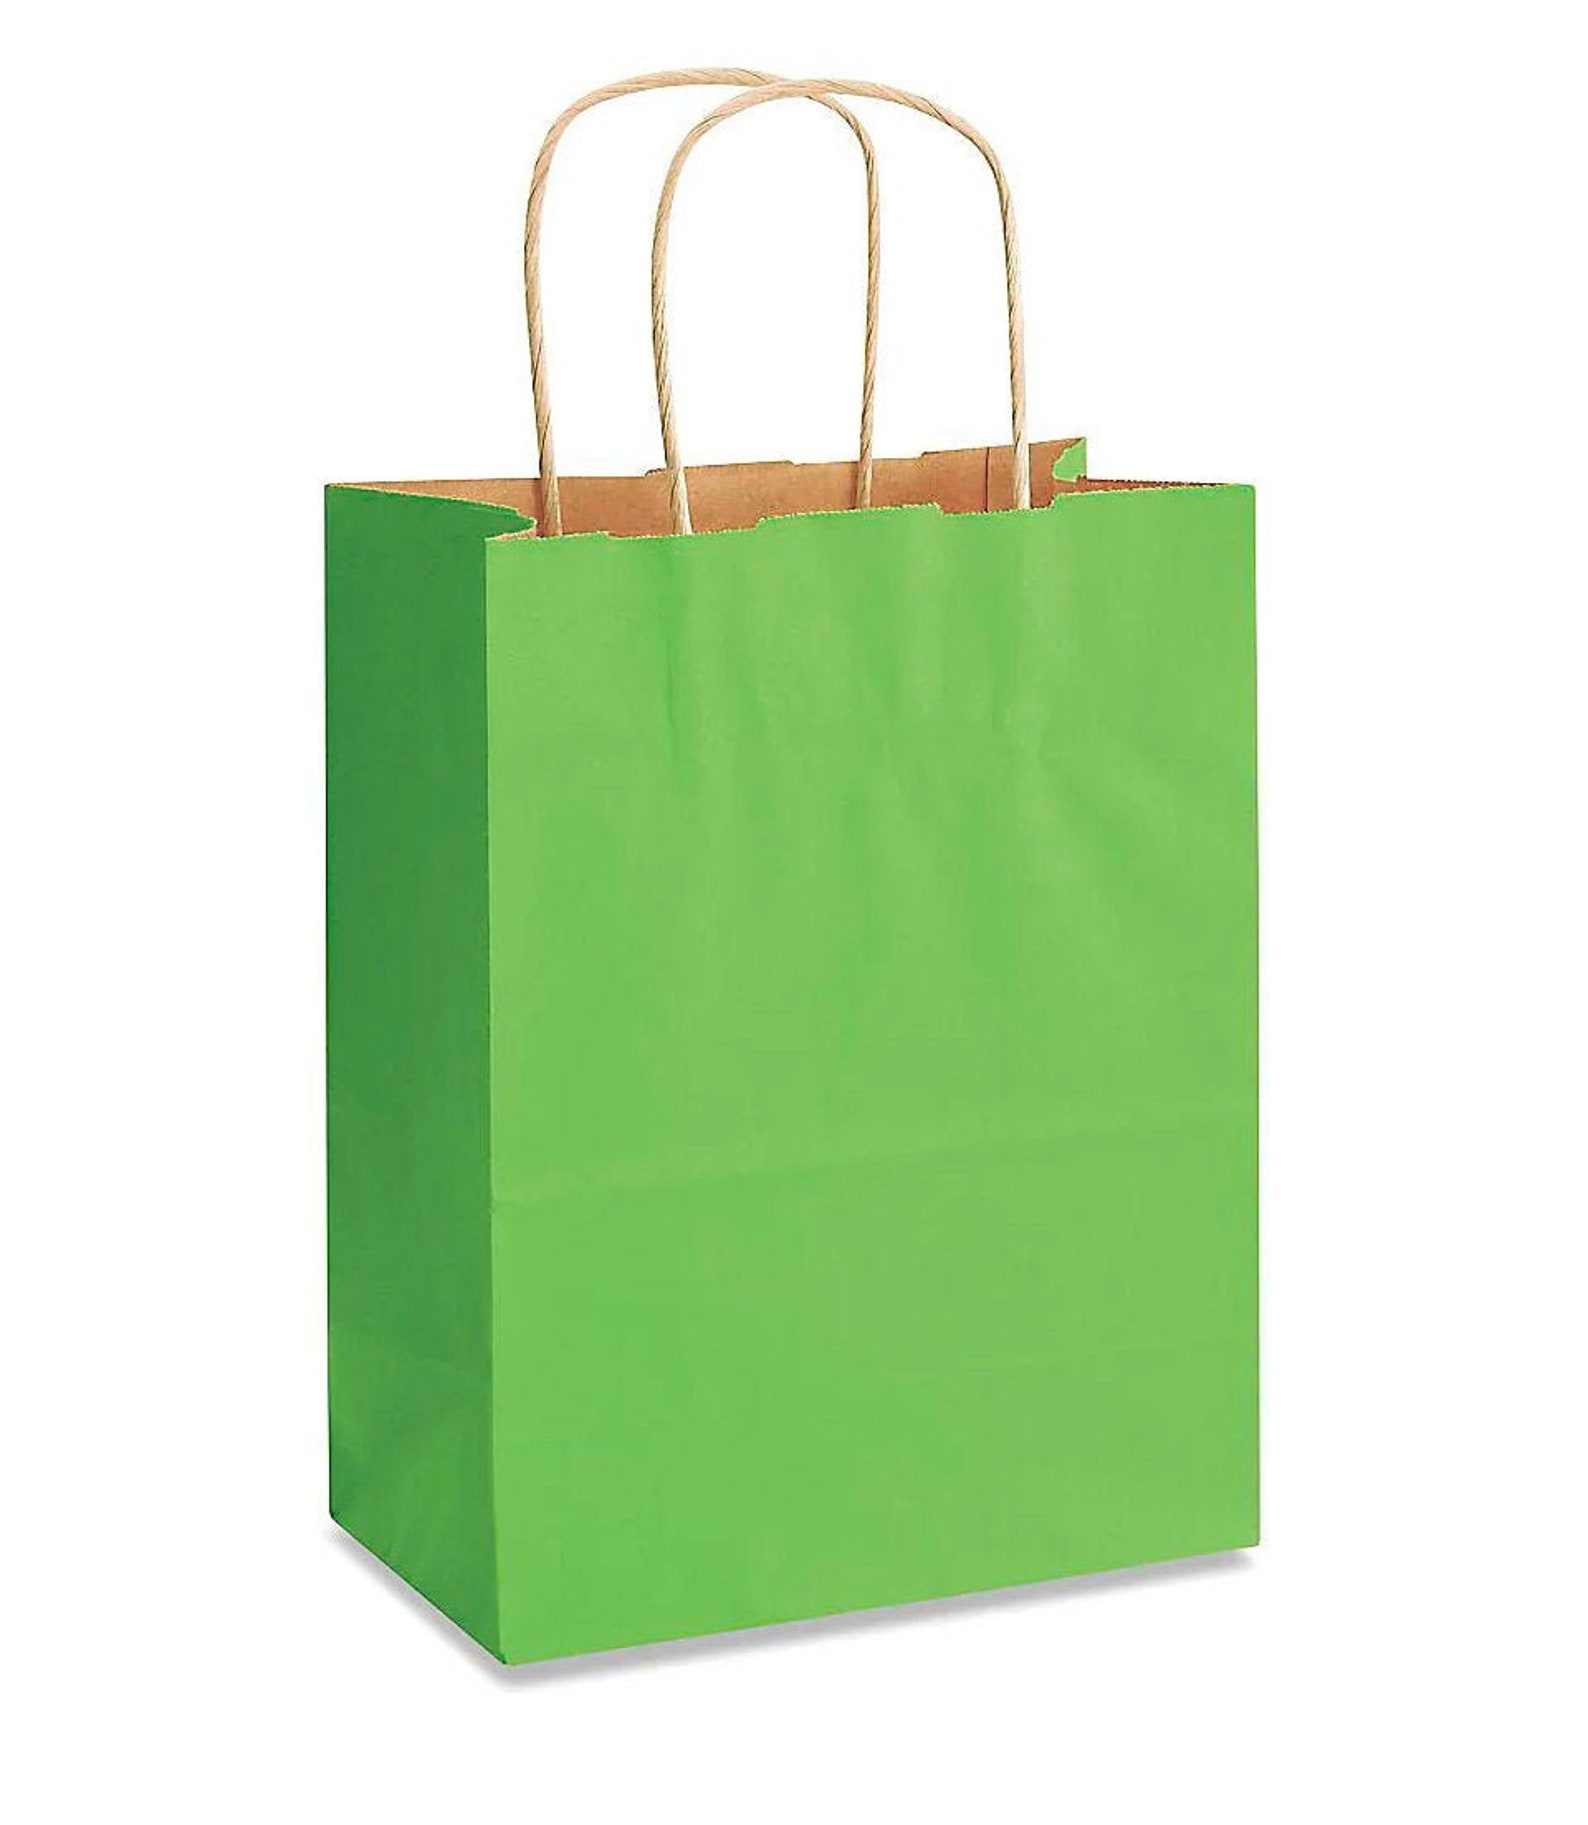 10.25x8x4.5 Lime Green Kraft Gift Bag With Handles Gift Etsy